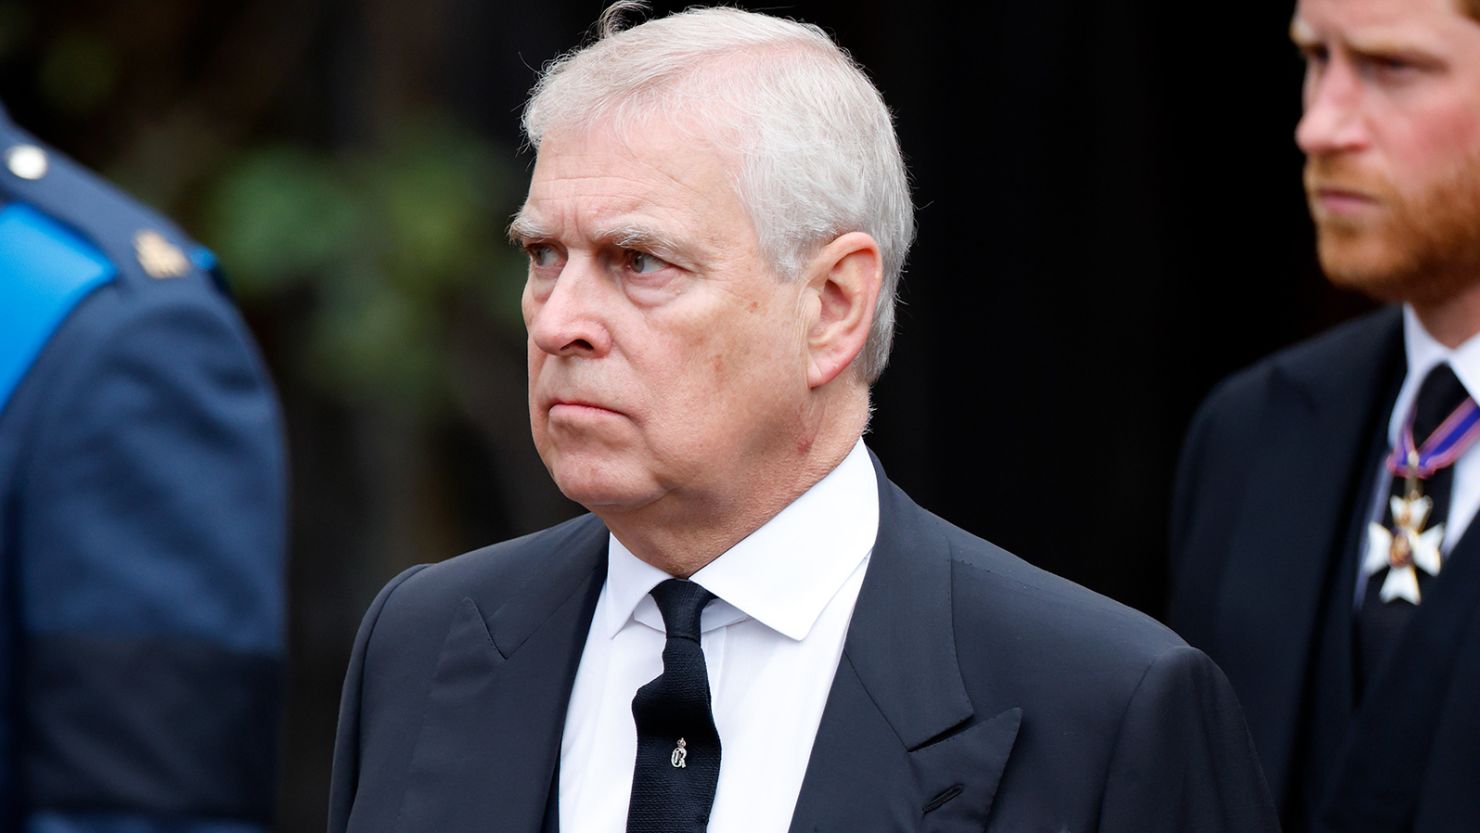 Prince Andrew, Duke of York attends the Committal Service for Queen Elizabeth II at St. George's Chapel, Windsor Castle on September 19, 2022. 